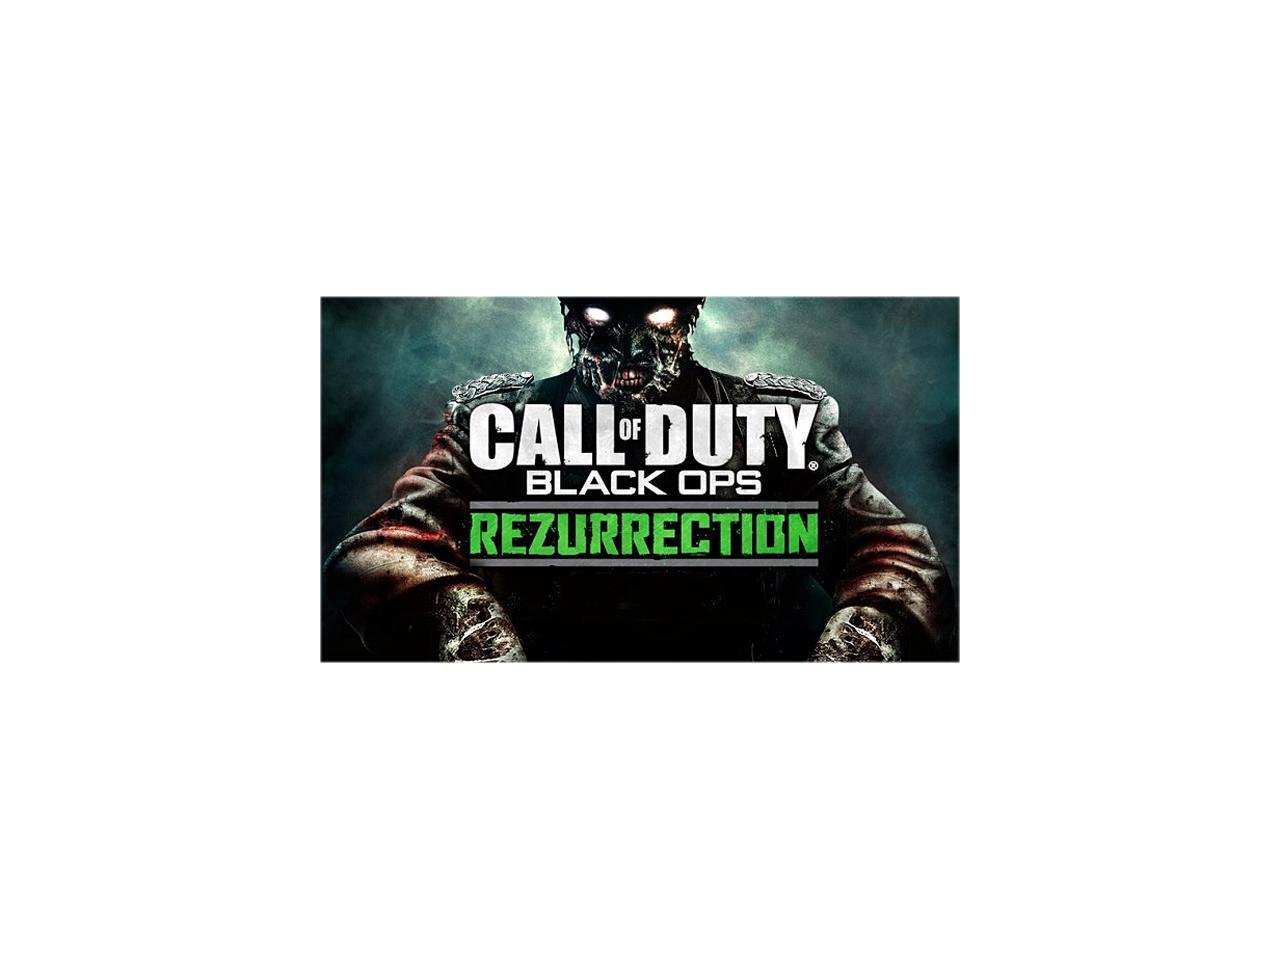 call of duty black ops rezurrection item id codes